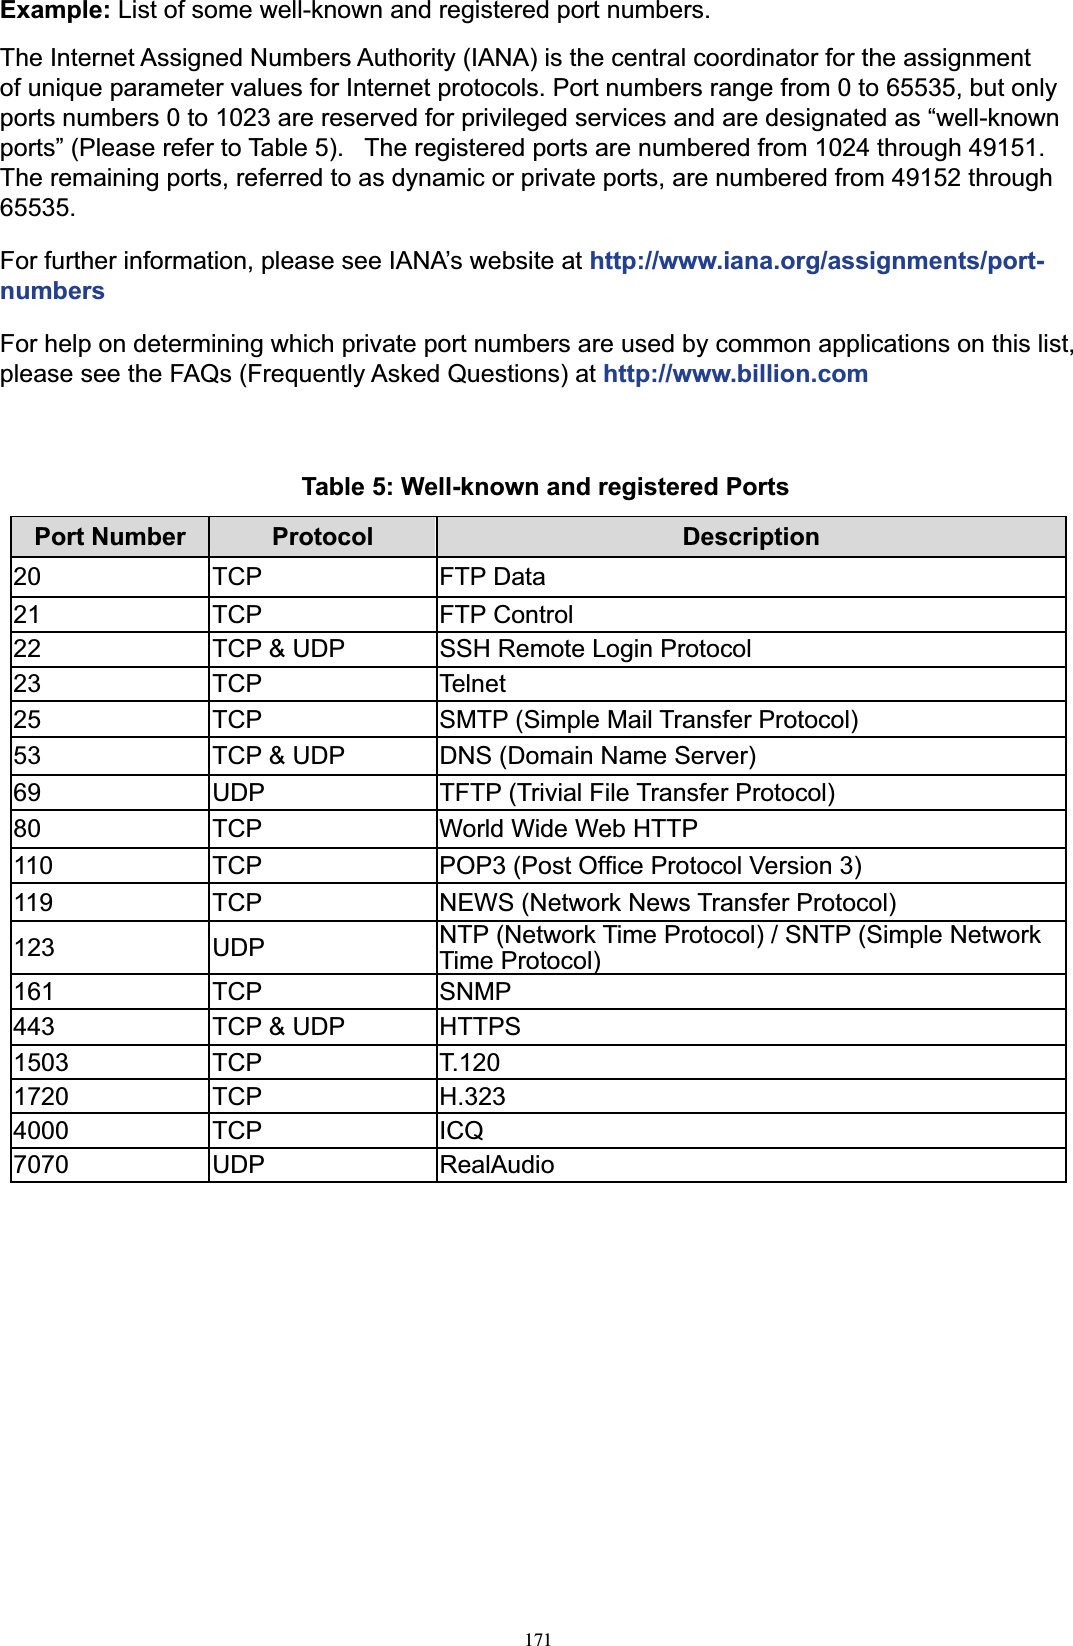 171Example: List of some well-known and registered port numbers. The Internet Assigned Numbers Authority (IANA) is the central coordinator for the assignment of unique parameter values for Internet protocols. Port numbers range from 0 to 65535, but only ports numbers 0 to 1023 are reserved for privileged services and are designated as “well-known ports” (Please refer to Table 5).   The registered ports are numbered from 1024 through 49151. The remaining ports, referred to as dynamic or private ports, are numbered from 49152 through 65535.For further information, please see IANA’s website at http://www.iana.org/assignments/port- numbersFor help on determining which private port numbers are used by common applications on this list, please see the FAQs (Frequently Asked Questions) at http://www.billion.comTable 5: Well-known and registered PortsPort Number Protocol Description20 TCP FTP Data21 TCP FTP Control22 TCP &amp; UDP SSH Remote Login Protocol23 TCP Telnet25 TCP SMTP (Simple Mail Transfer Protocol)53 TCP &amp; UDP DNS (Domain Name Server)69 UDP TFTP (Trivial File Transfer Protocol)80 TCP World Wide Web HTTP110 TCP POP3 (Post Office Protocol Version 3)119 TCP NEWS (Network News Transfer Protocol)123 UDP NTP (Network Time Protocol) / SNTP (Simple Network Time Protocol)161 TCP SNMP443 TCP &amp; UDP HTTPS1503 TCP T.1201720 TCP H.3234000 TCP ICQ7070 UDP RealAudio